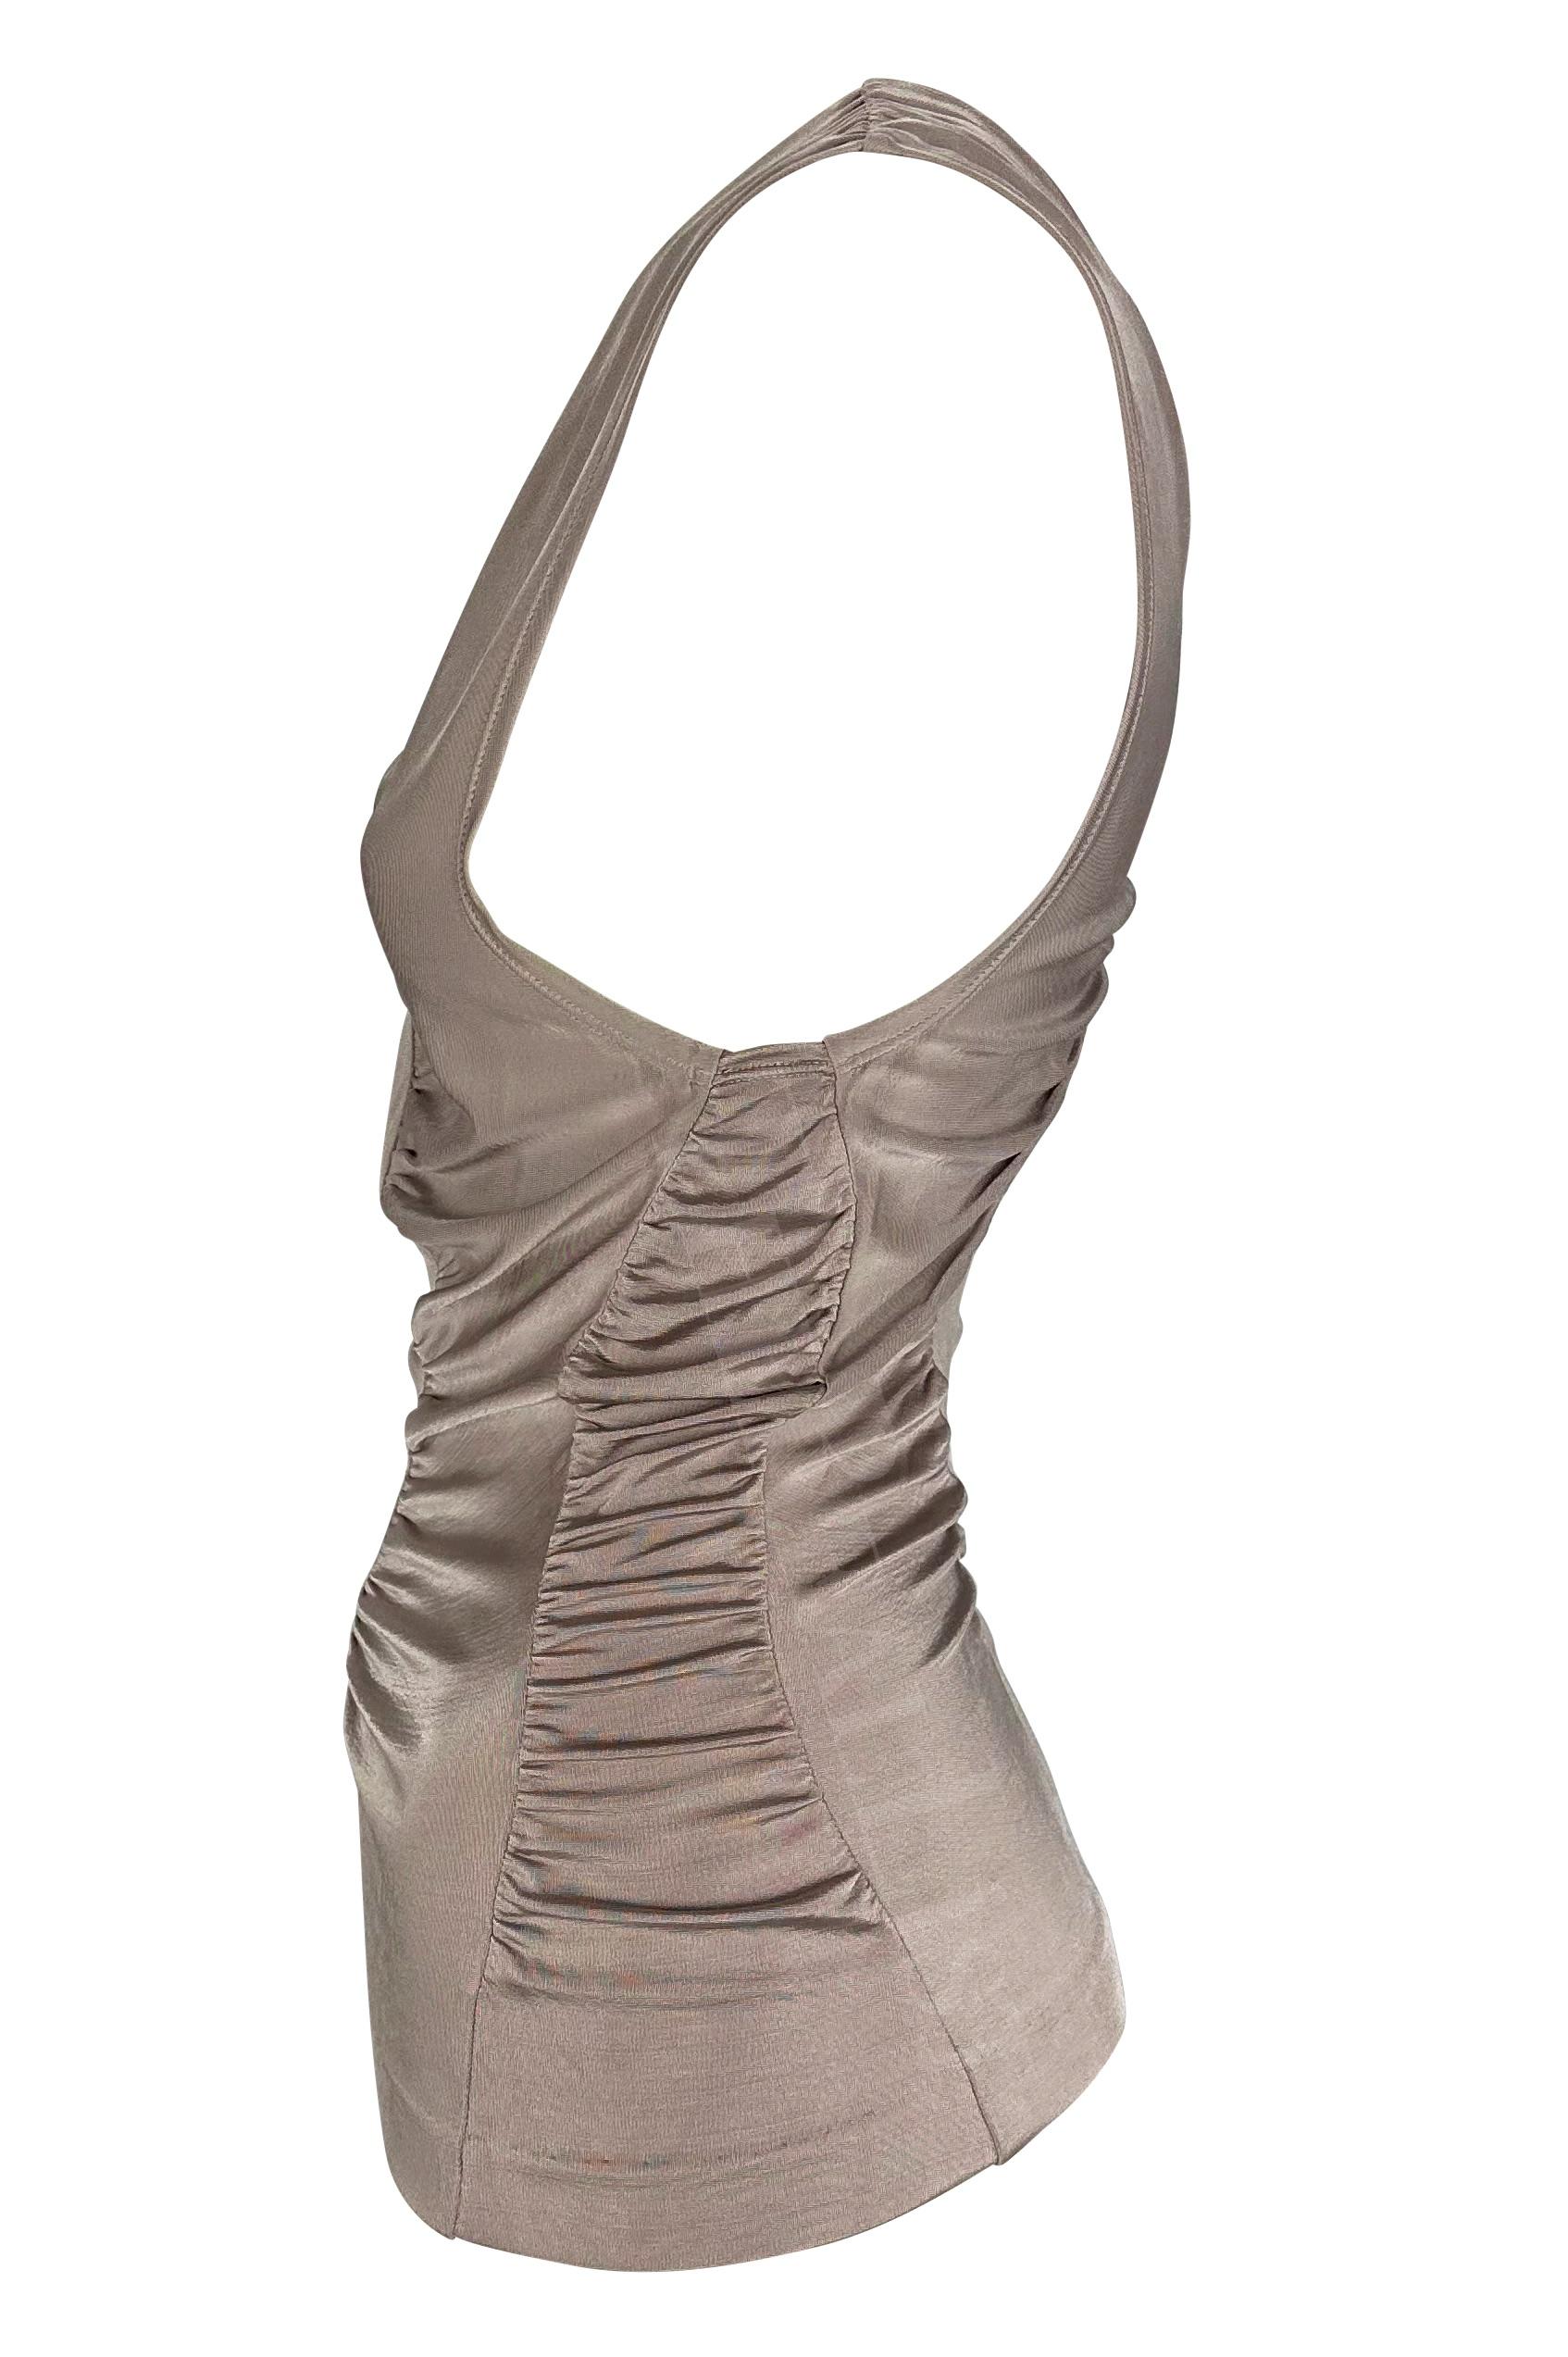 S/S 2003 Yves Saint Laurent Rive Gauche by Tom Ford Blush Slinky Tank Top  In Excellent Condition For Sale In West Hollywood, CA